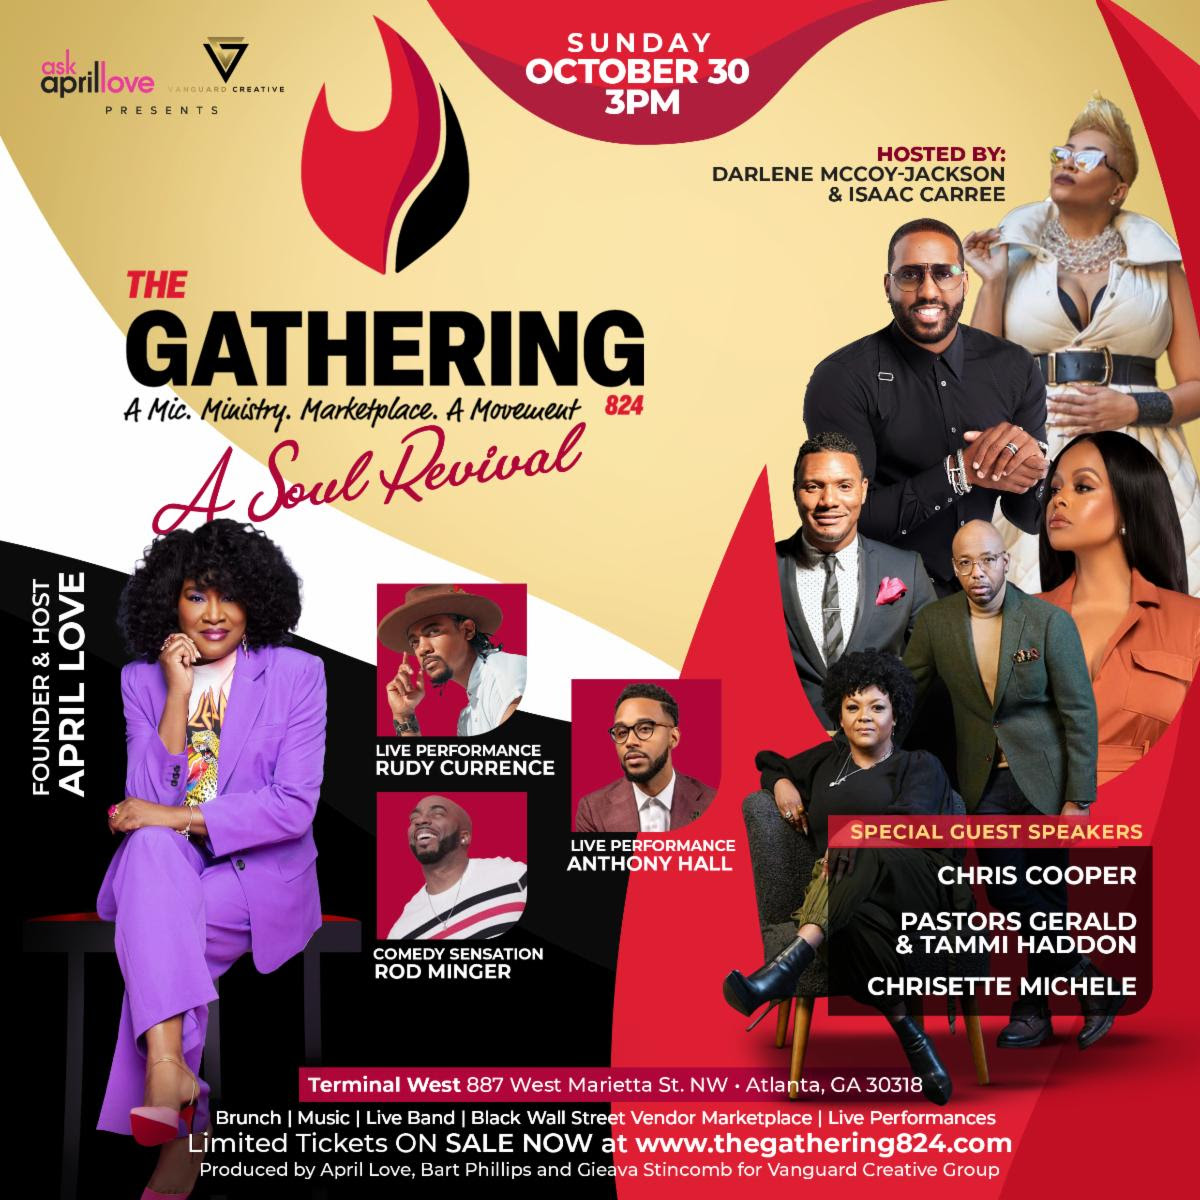 join-april-love,-chrisette-michele,-isaac-carree-at-the-gathering-824:-a-soul-revival!-shifting-atlanta’s-faith-based-culture-on-10/30